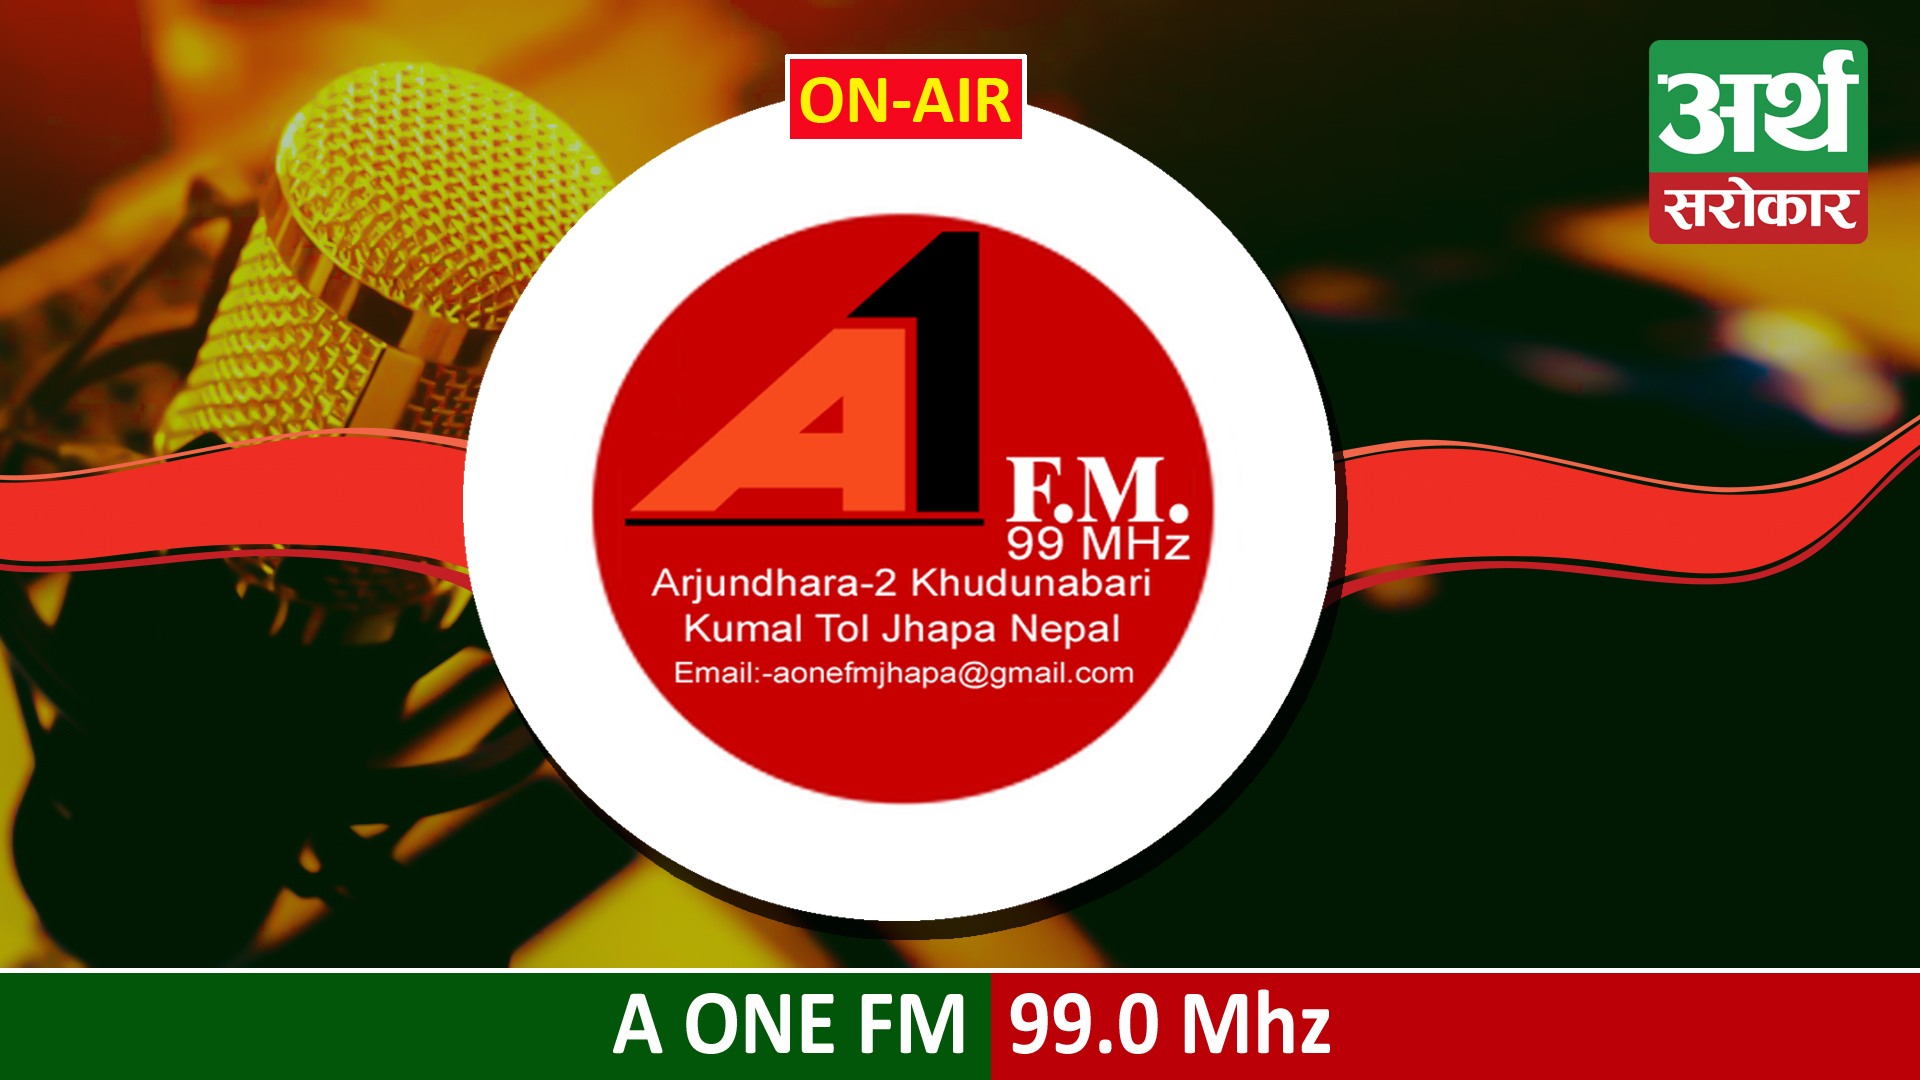 A one FM 99 Mhz